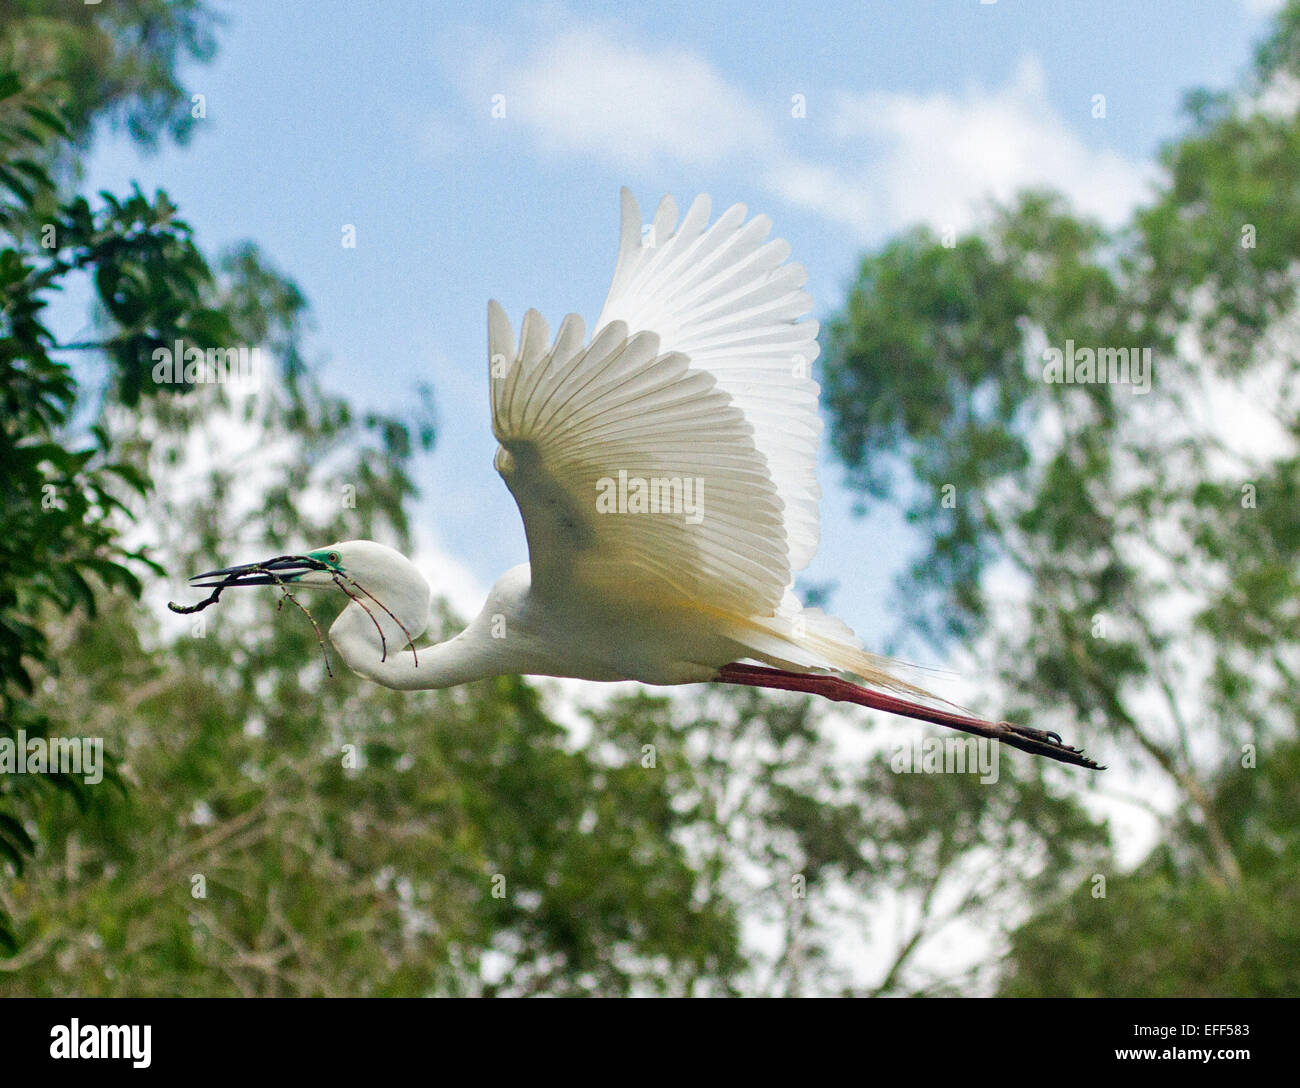 Australian great egret, Ardea modesta, in flight with stick for nest in beak, against background of trees and blue sky Stock Photo